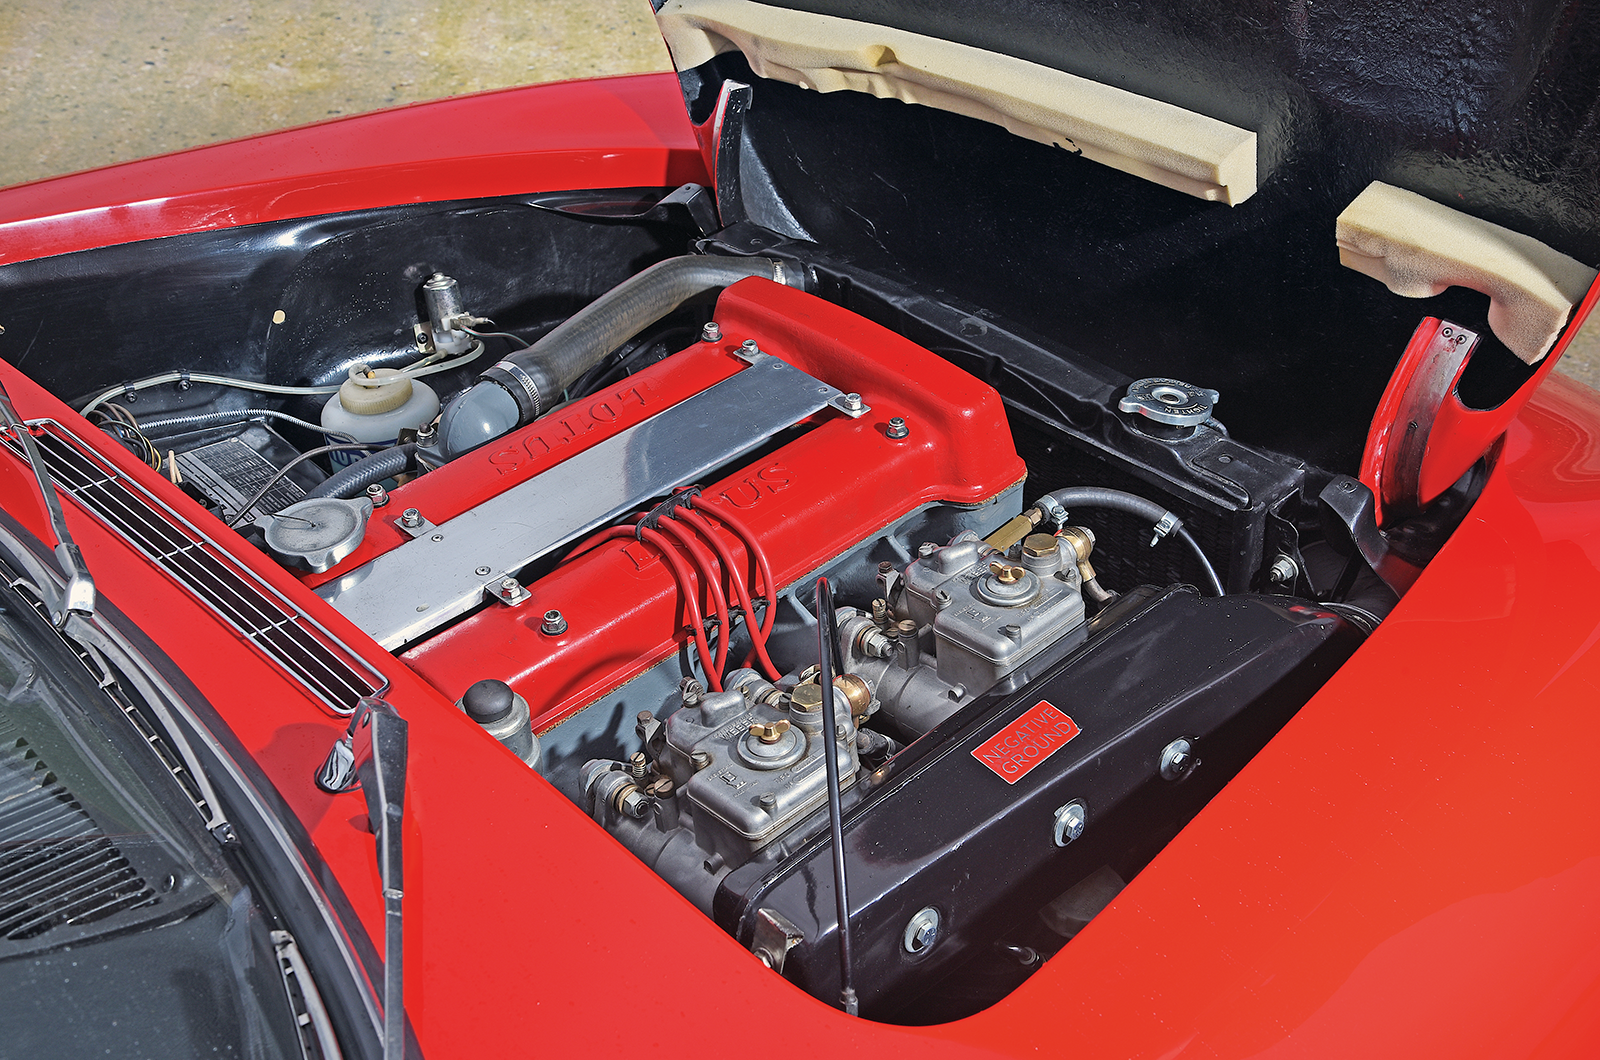 The dohc 1558cc four-cylinder engine of the Lotus Elan